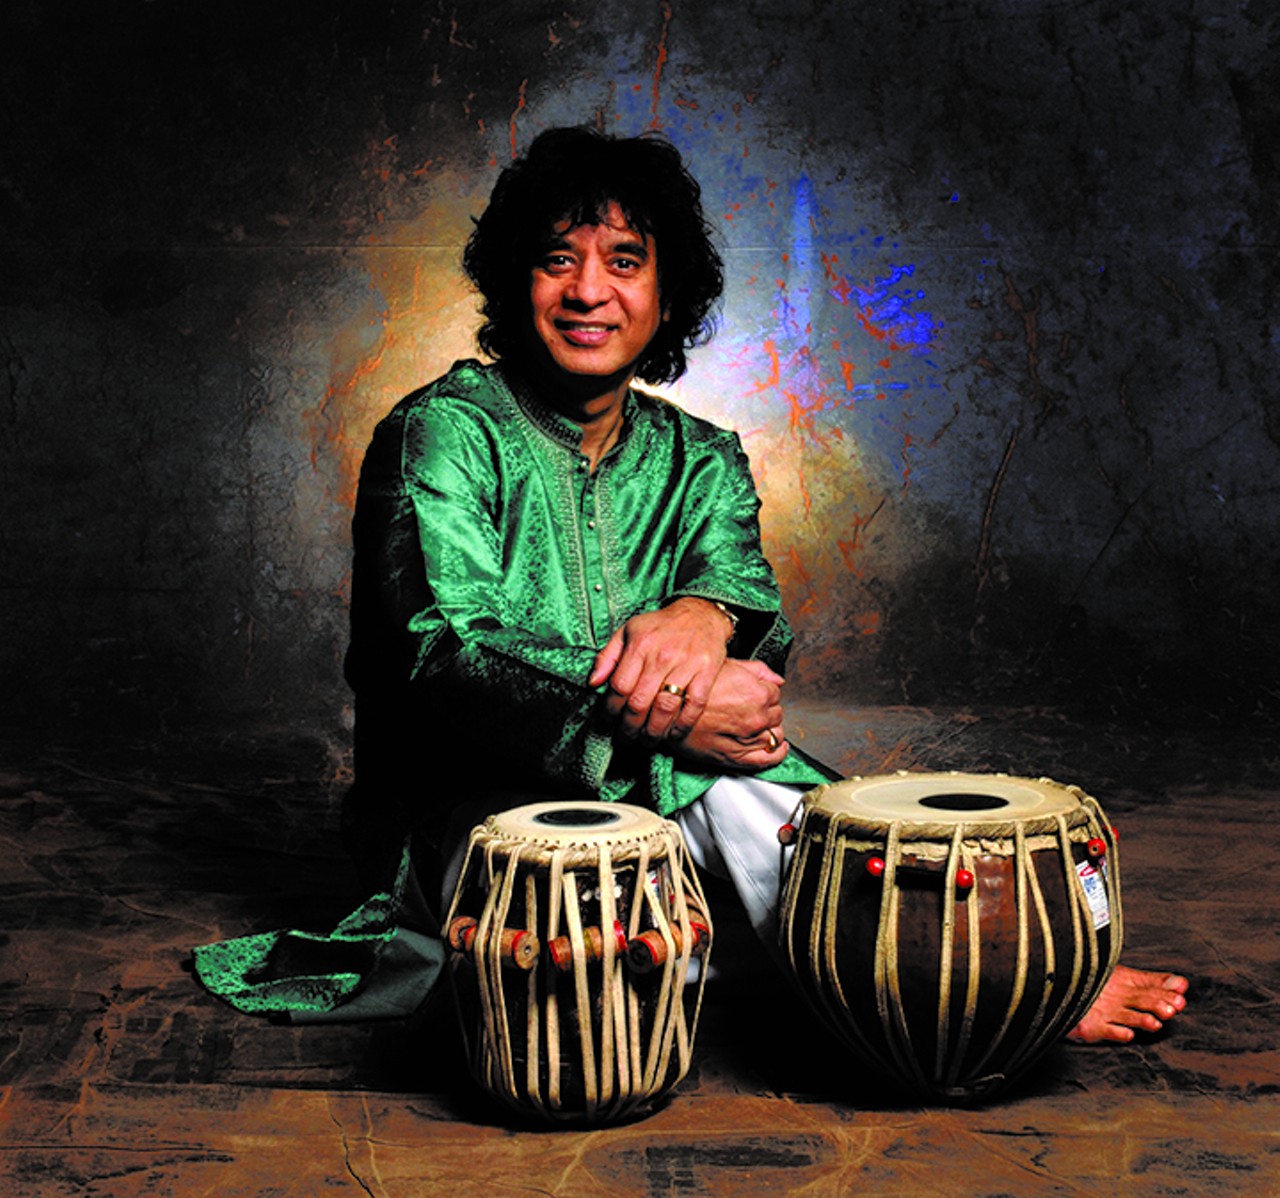 Saturday, Nov. 4Crosscurrents: Zakir Hussain and Dave Holland at Bob Carr TheaterPhoto of Zakir Hussain by Jim Maguire